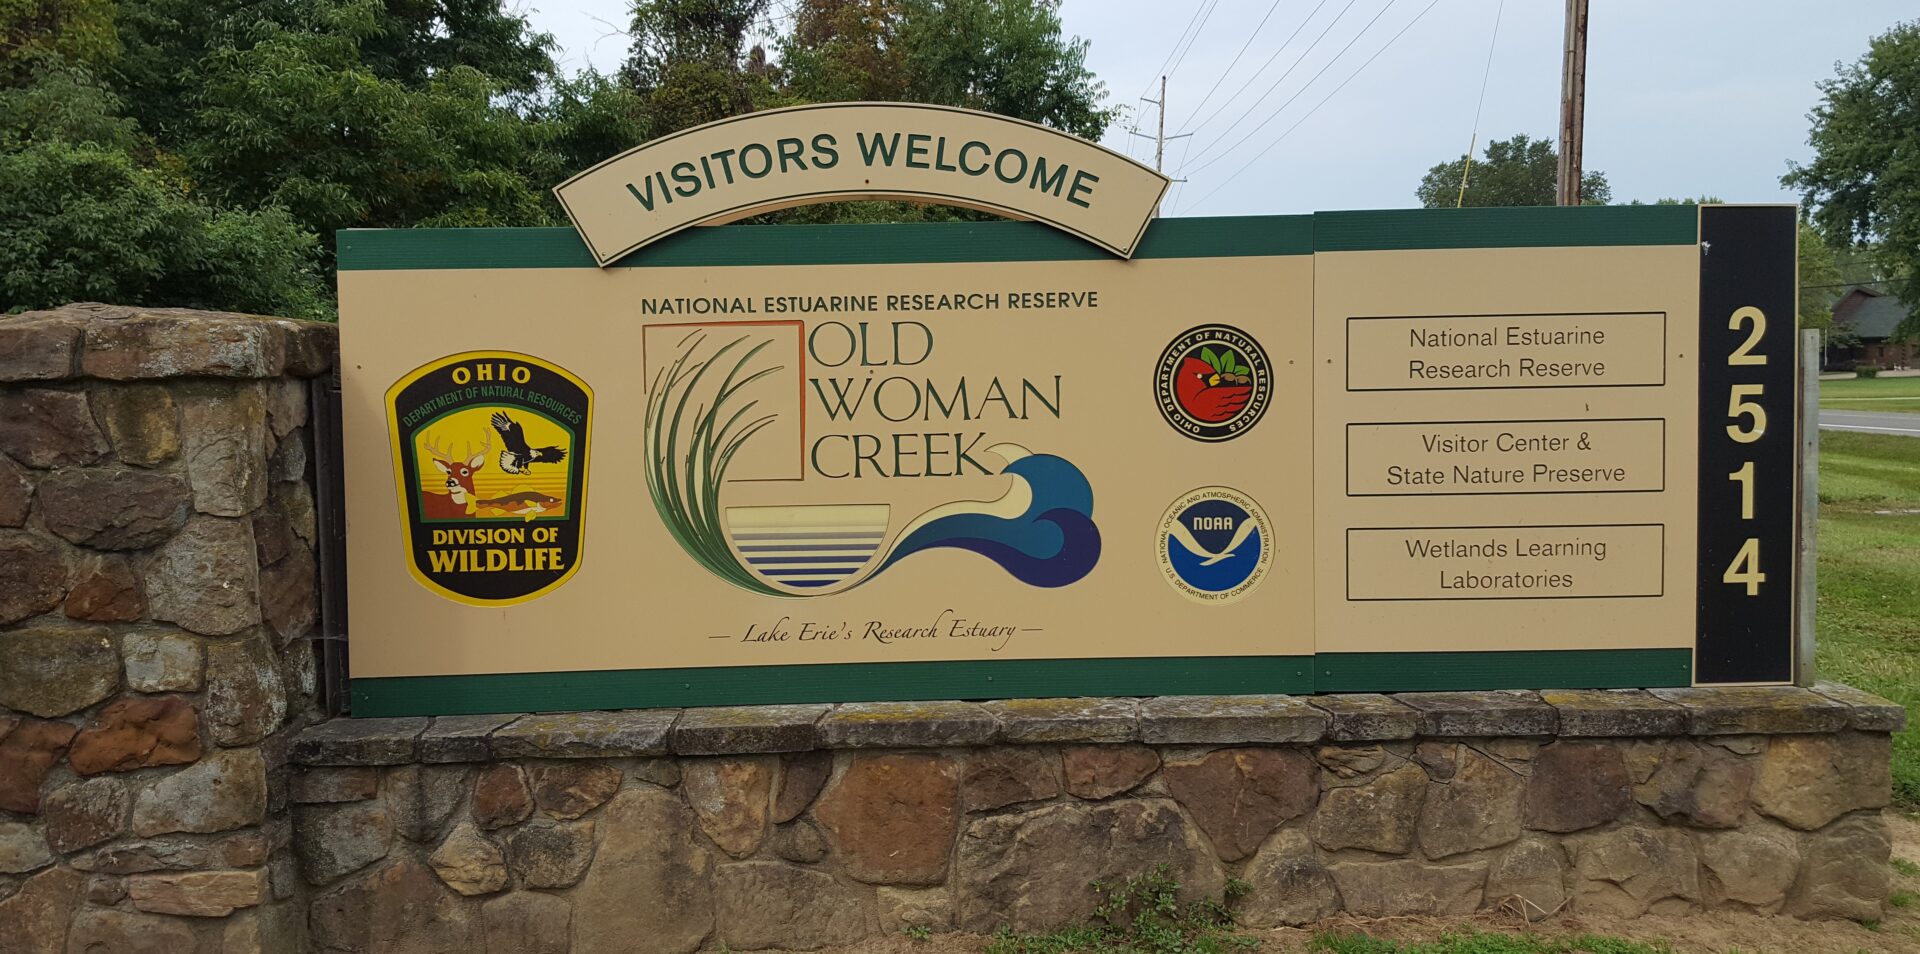 Old Woman Creek State Nature Preserve welcome board